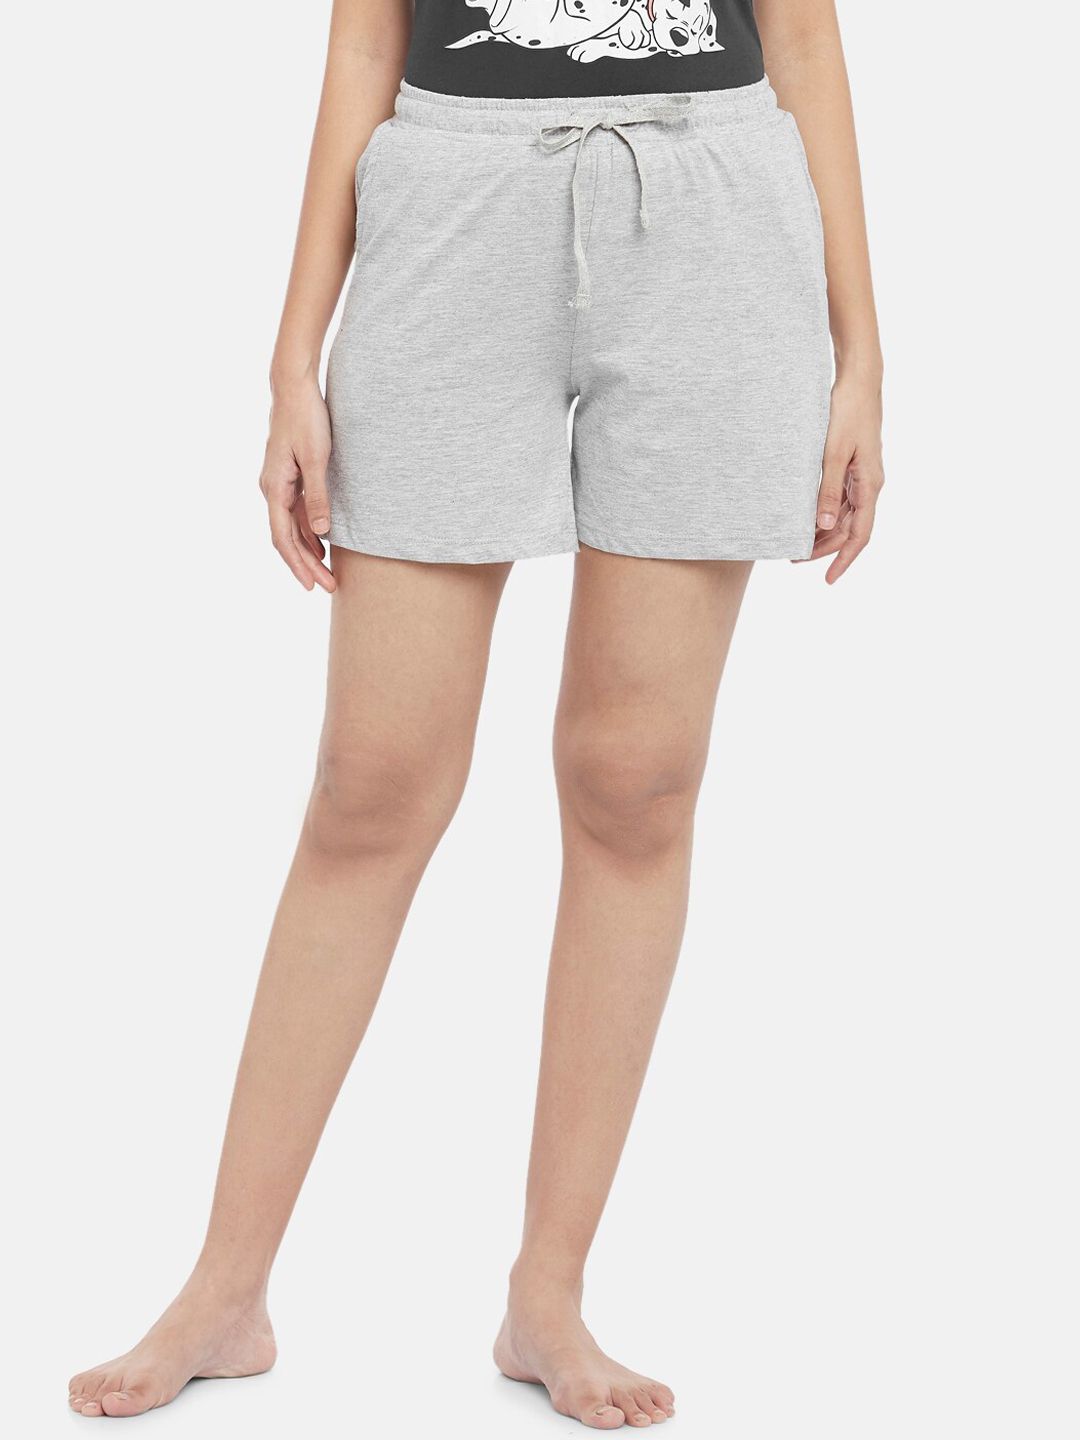 Dreamz by Pantaloons Women Grey Cotton Lounge Shorts Price in India